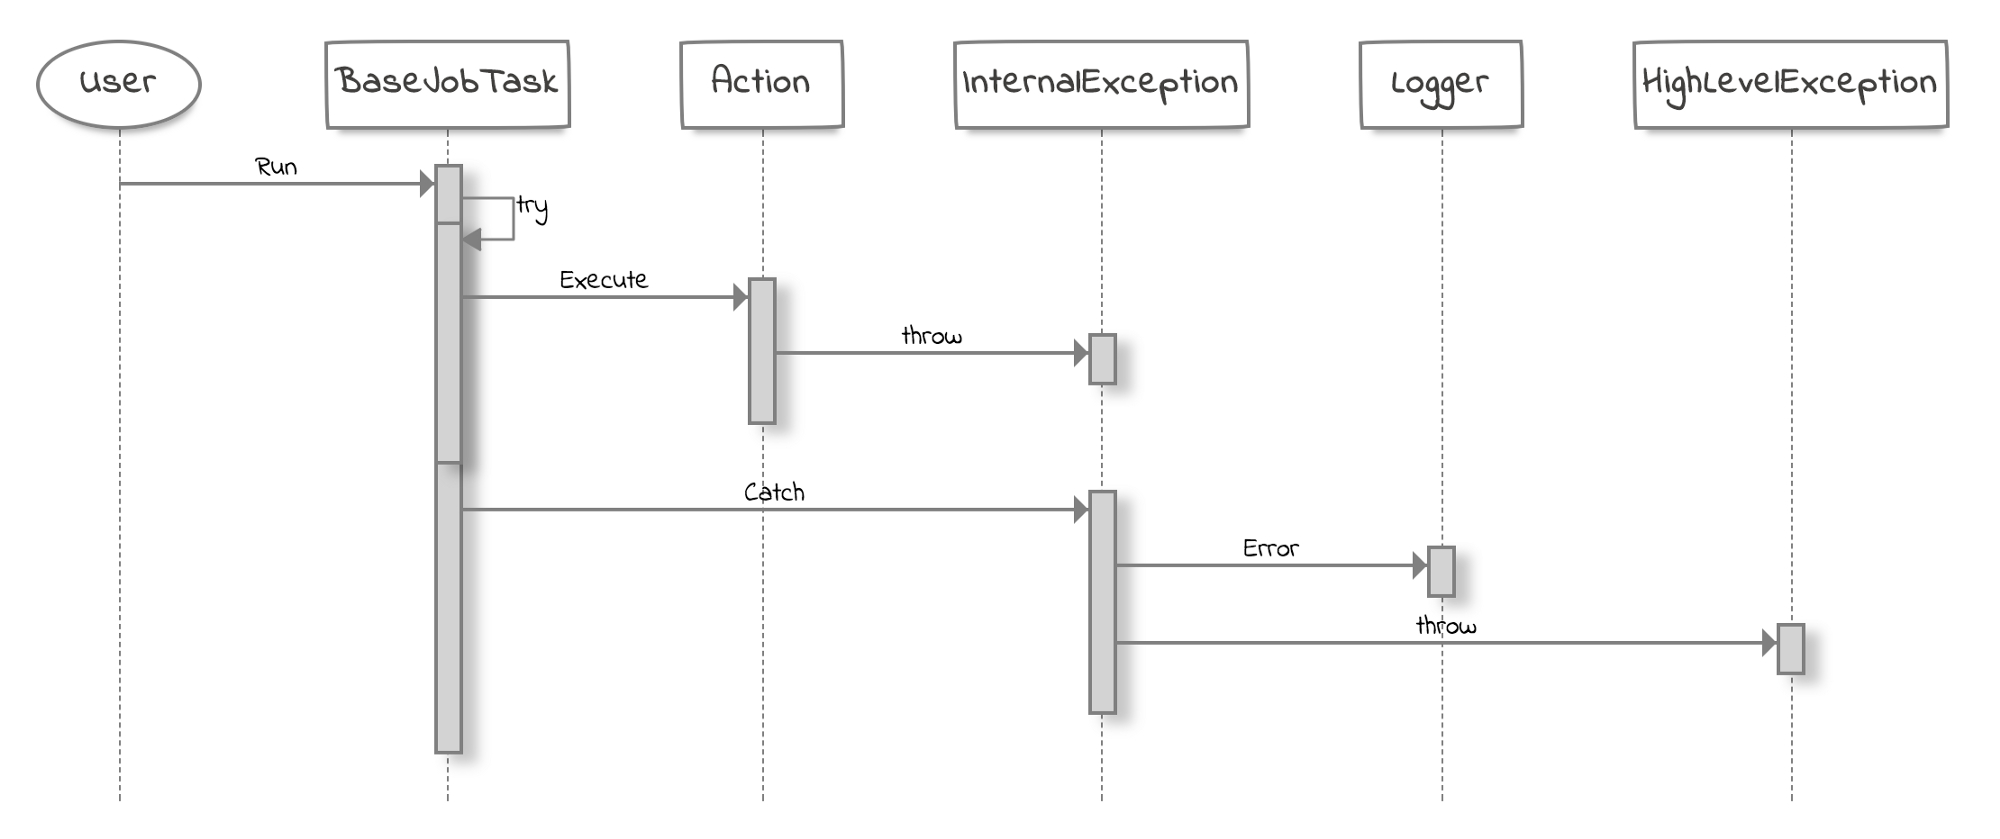 Uml Activity Diagram How I Draw A Try Catch In A Sequence Diagram Zenuml Medium